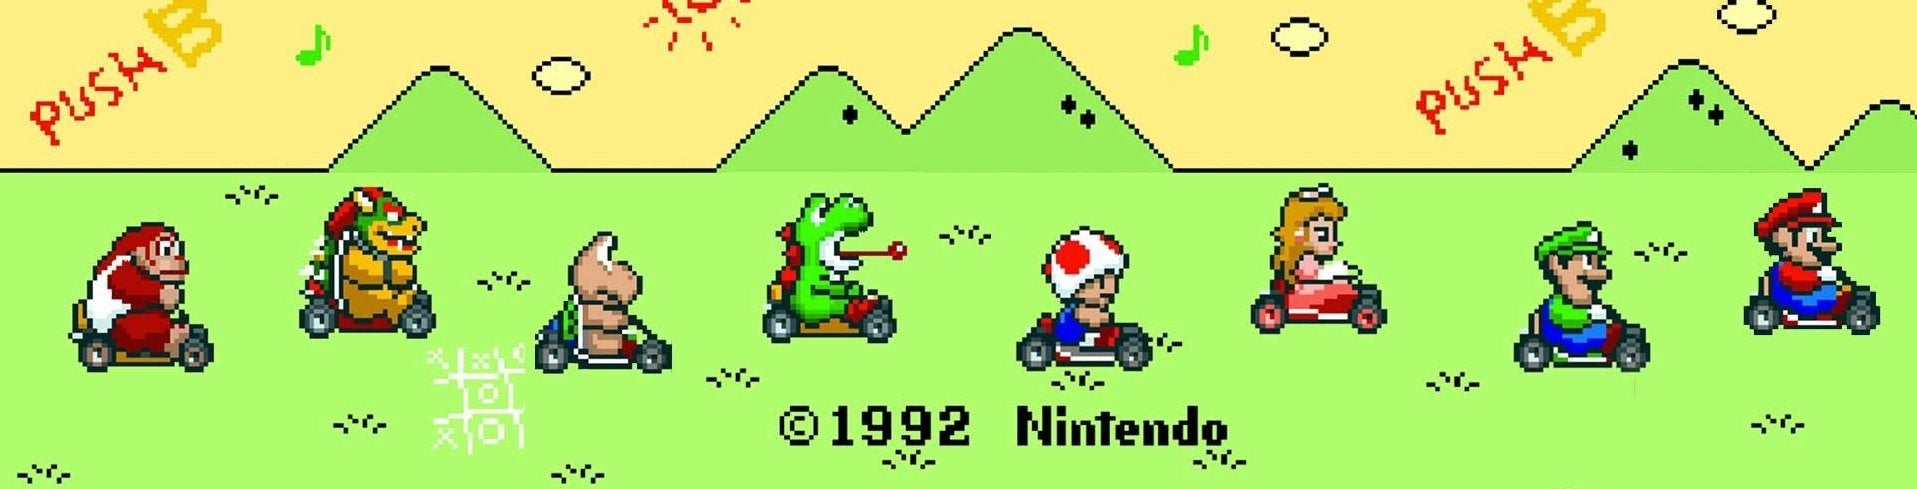 Image for Video: Let's Replay Super Mario Kart